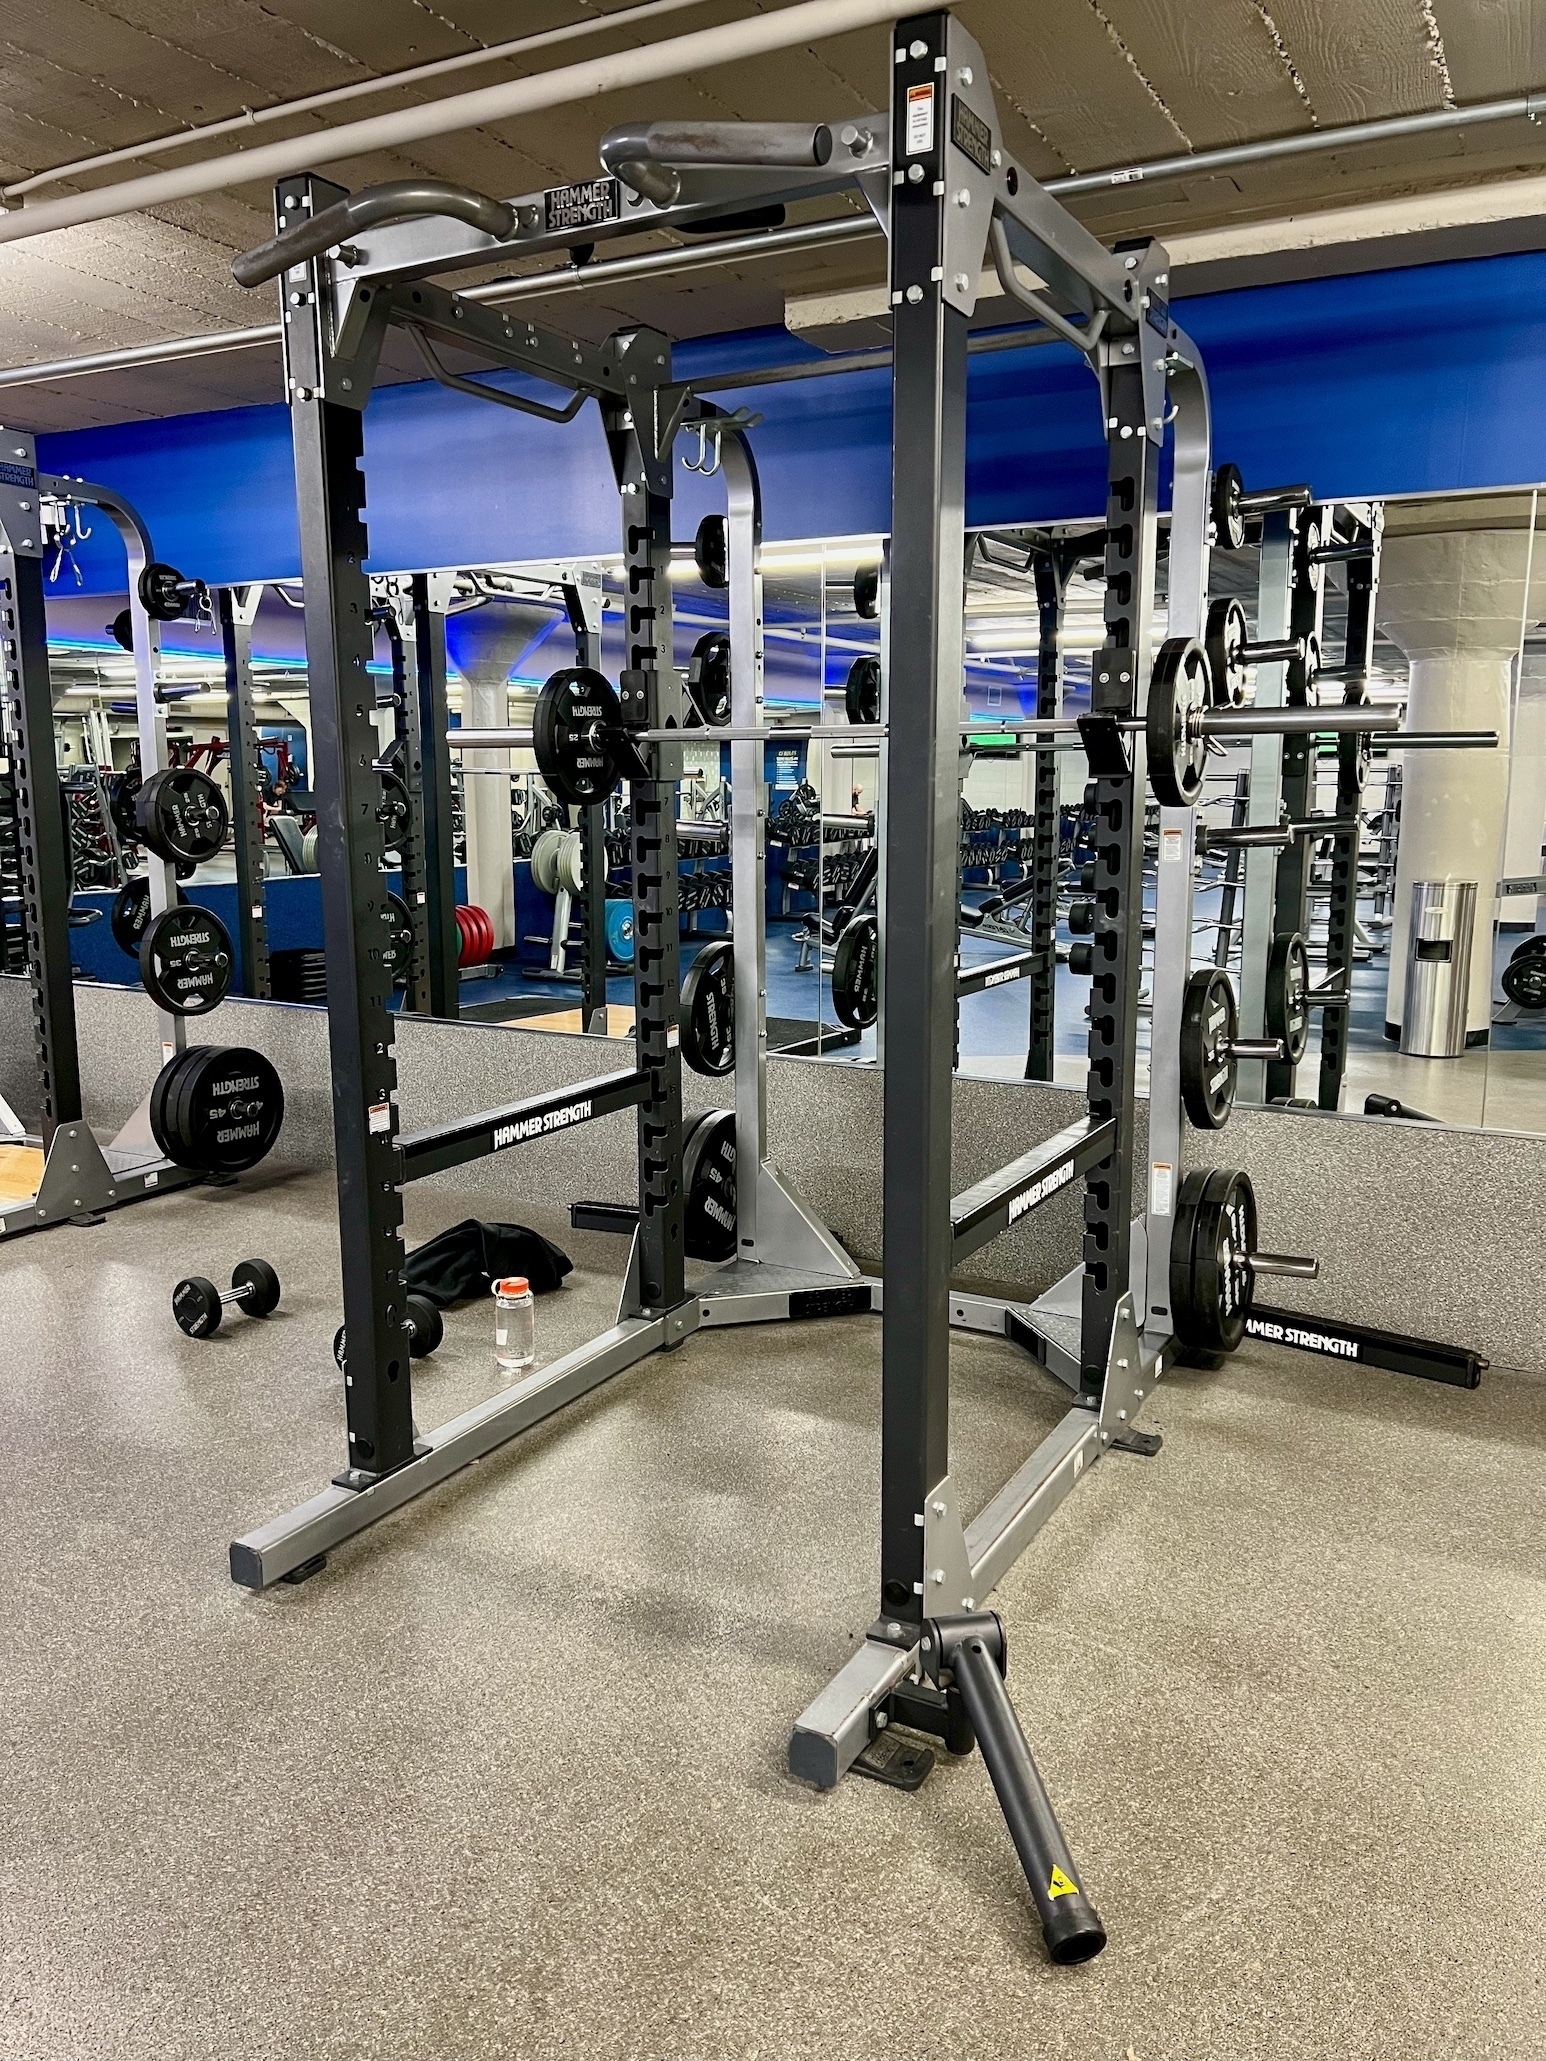 Weight machine, with various brackets to hold bar-bells, in front of a wall of mirrors, reflecting other parts of the gym; the machine is set up for squats.